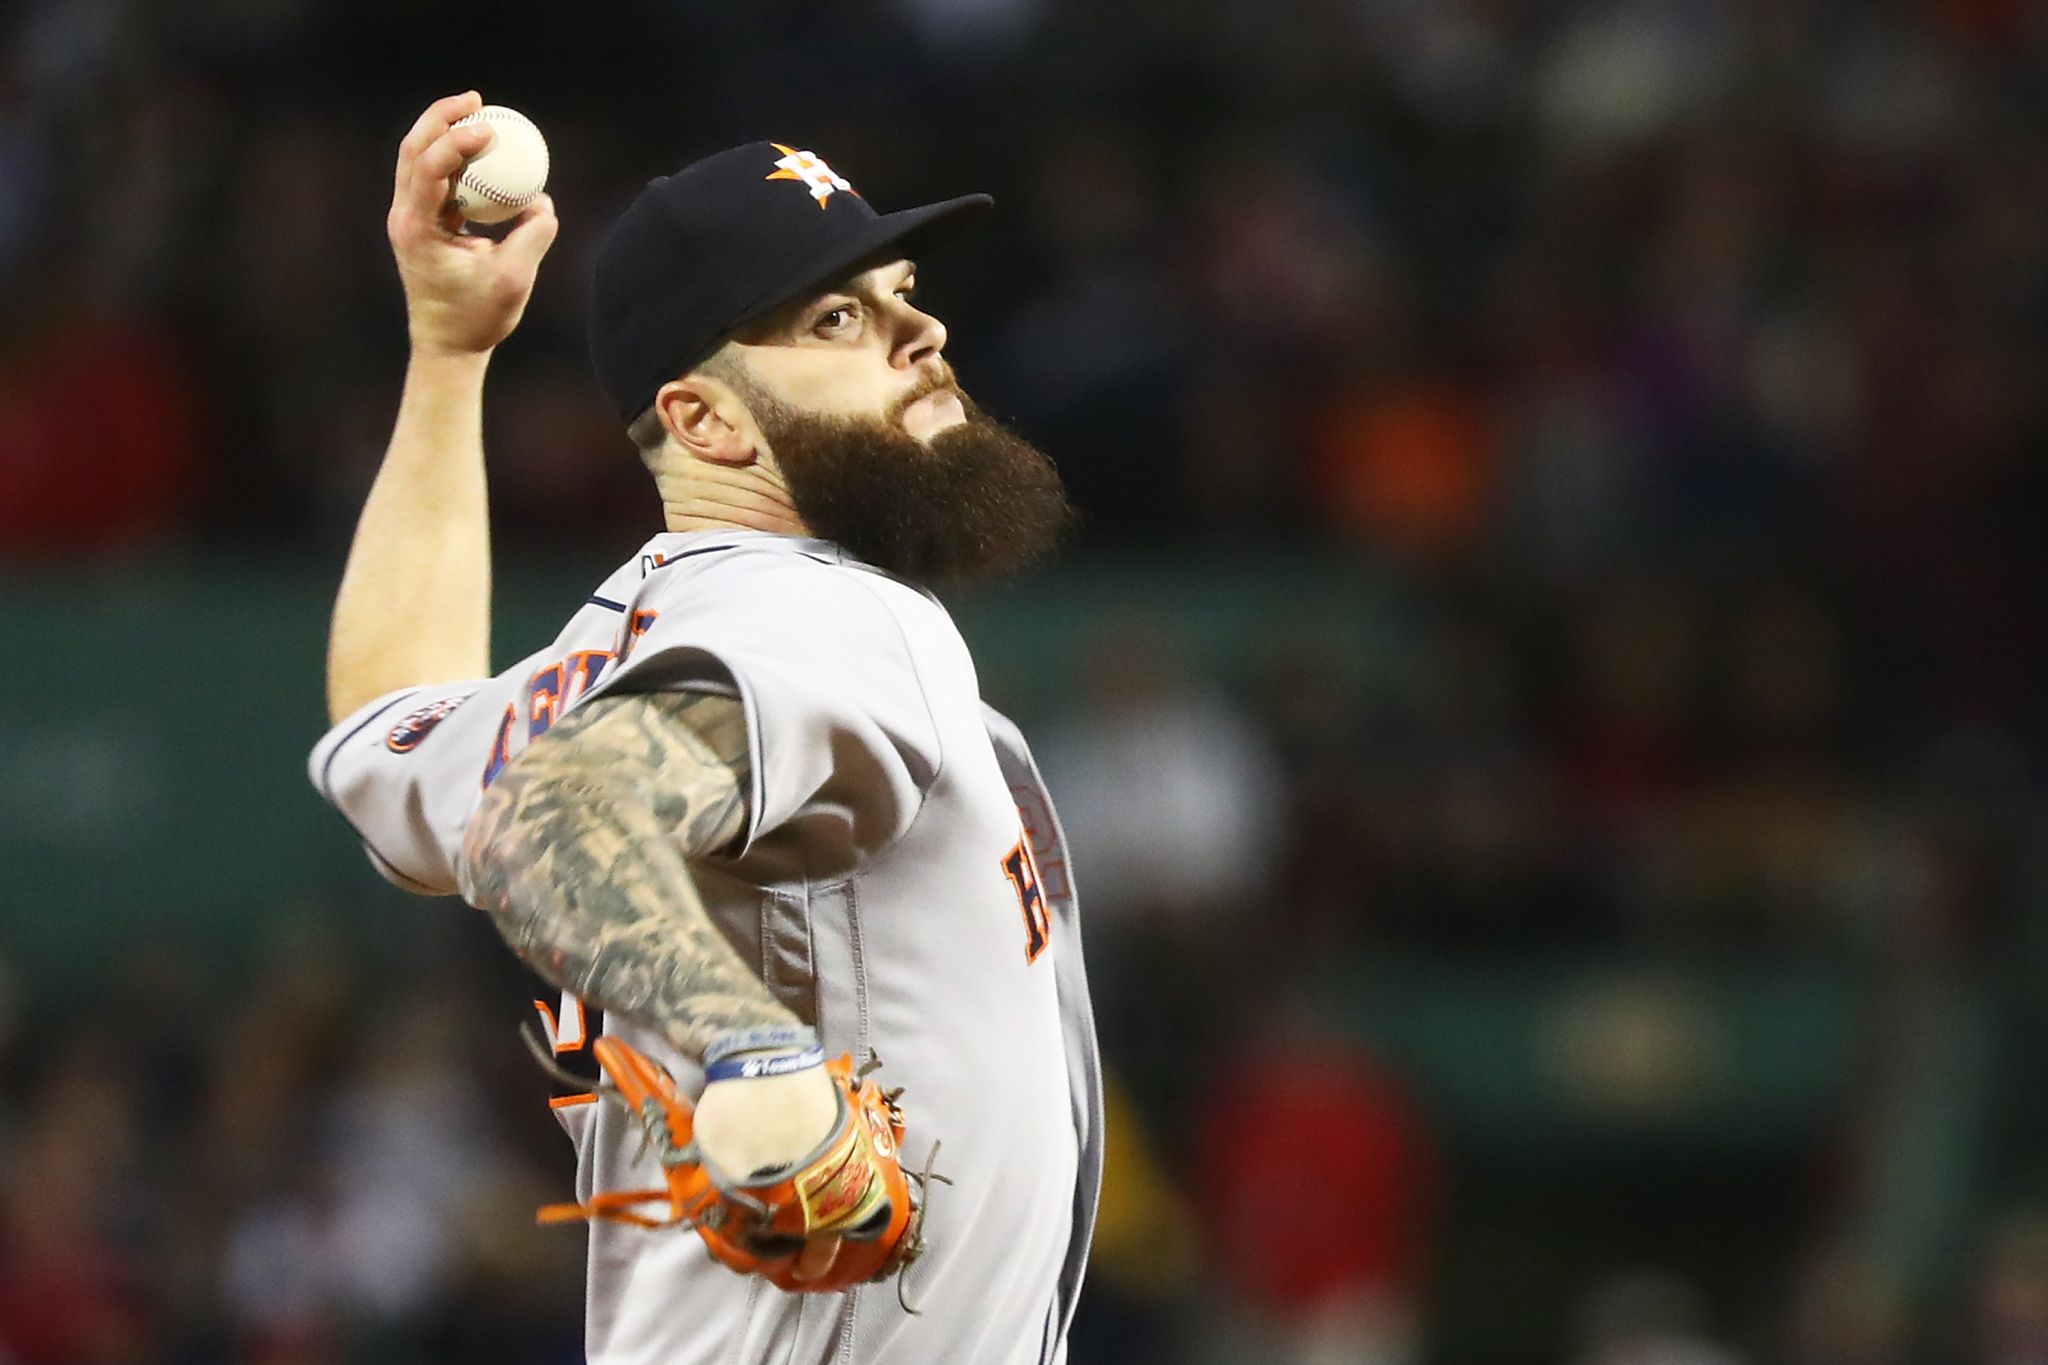 Dallas Keuchel Signs With the Braves to End the Nightmare MLB